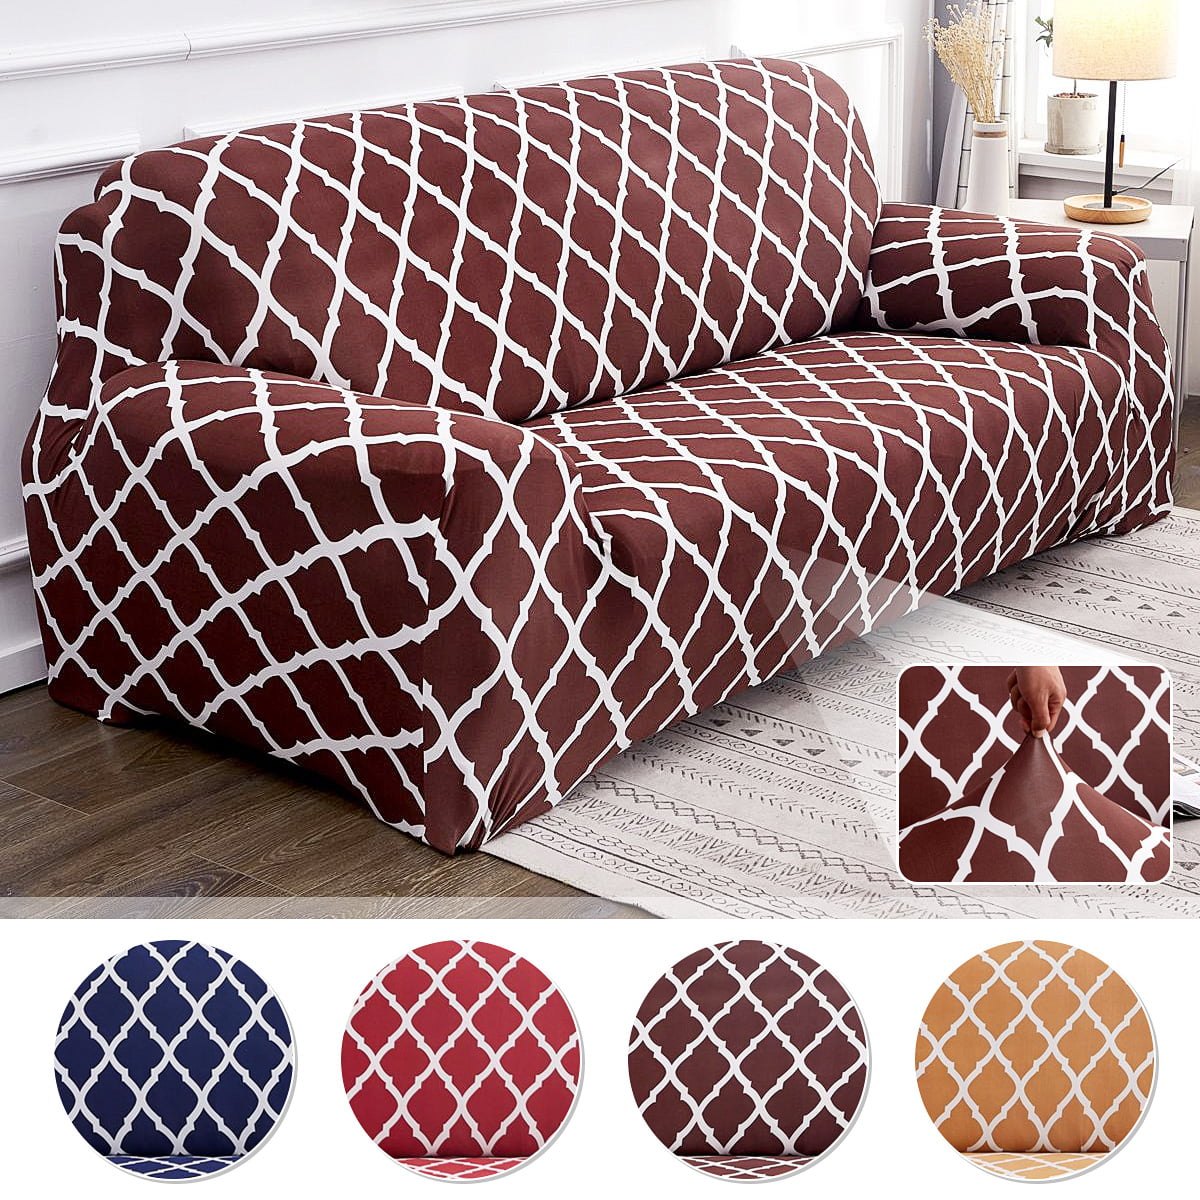 1/2/3/4 Seater Elastic Slipcovers Sofa Case Non-slip Protector Soft Couch Cover 